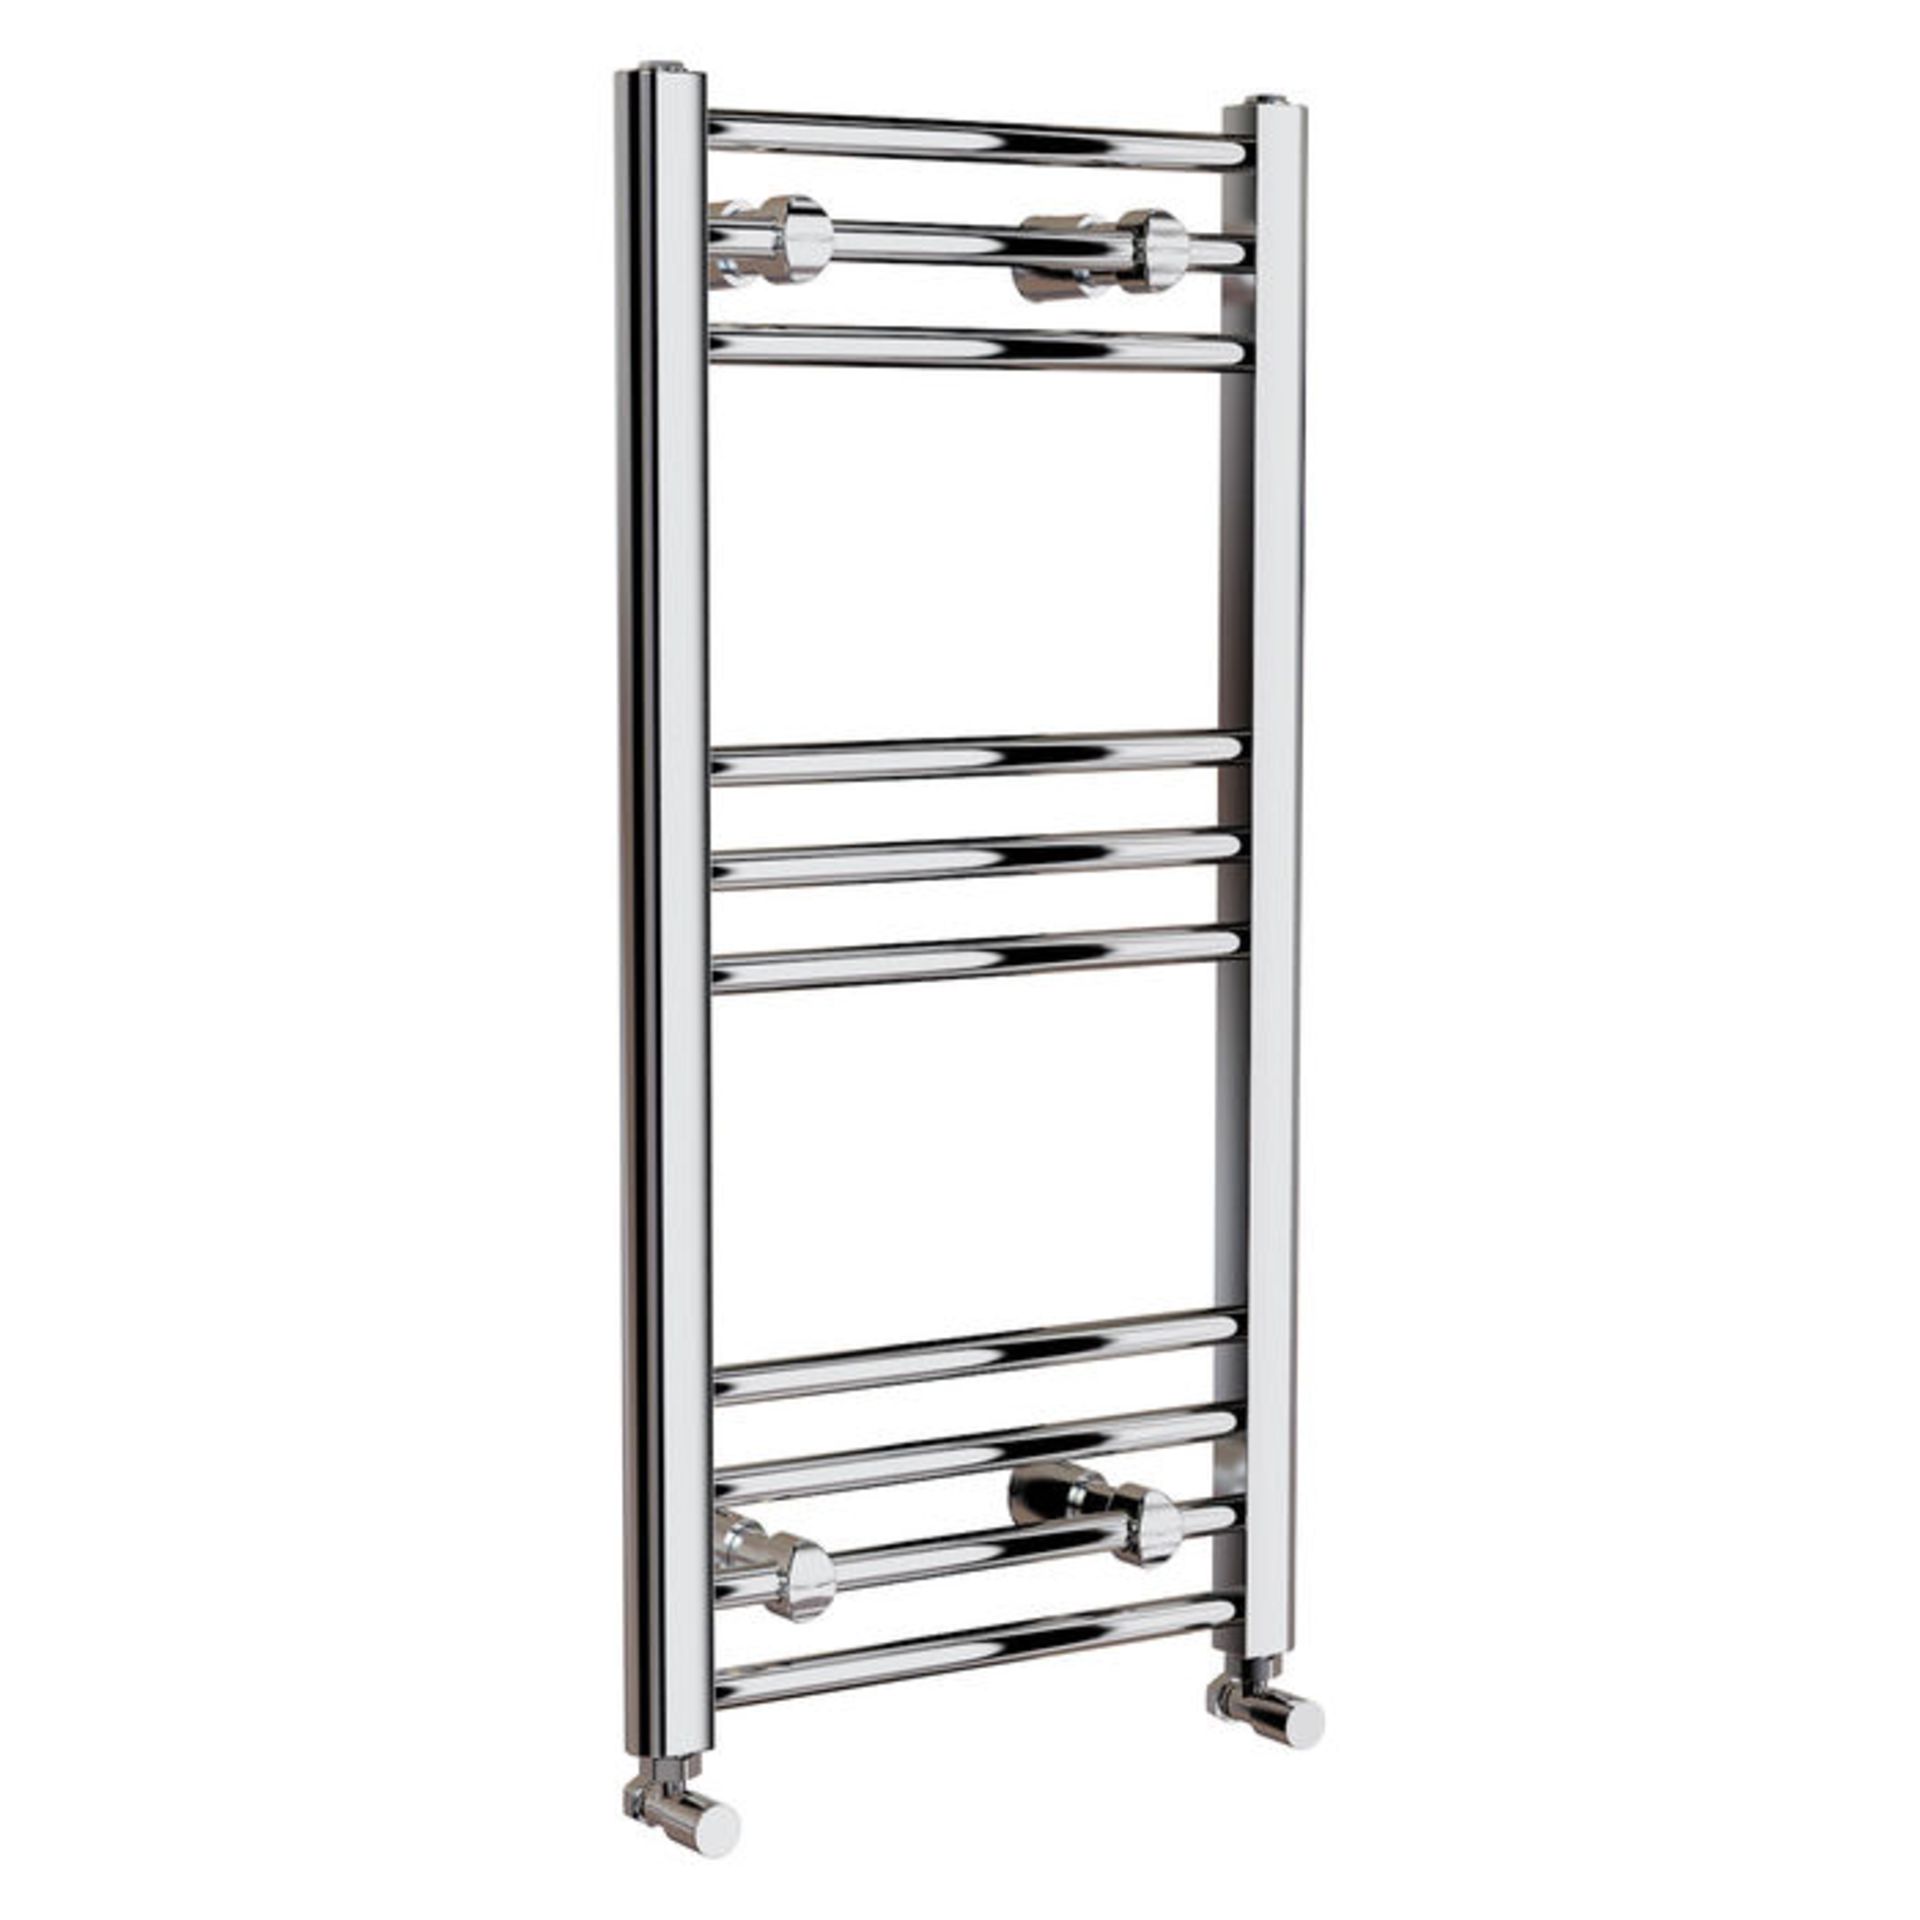 (RK46) 800x400mm - 20mm Tubes - Chrome Heated Straight Rail Ladder Towel Radiator. . Low carbon... - Image 3 of 3